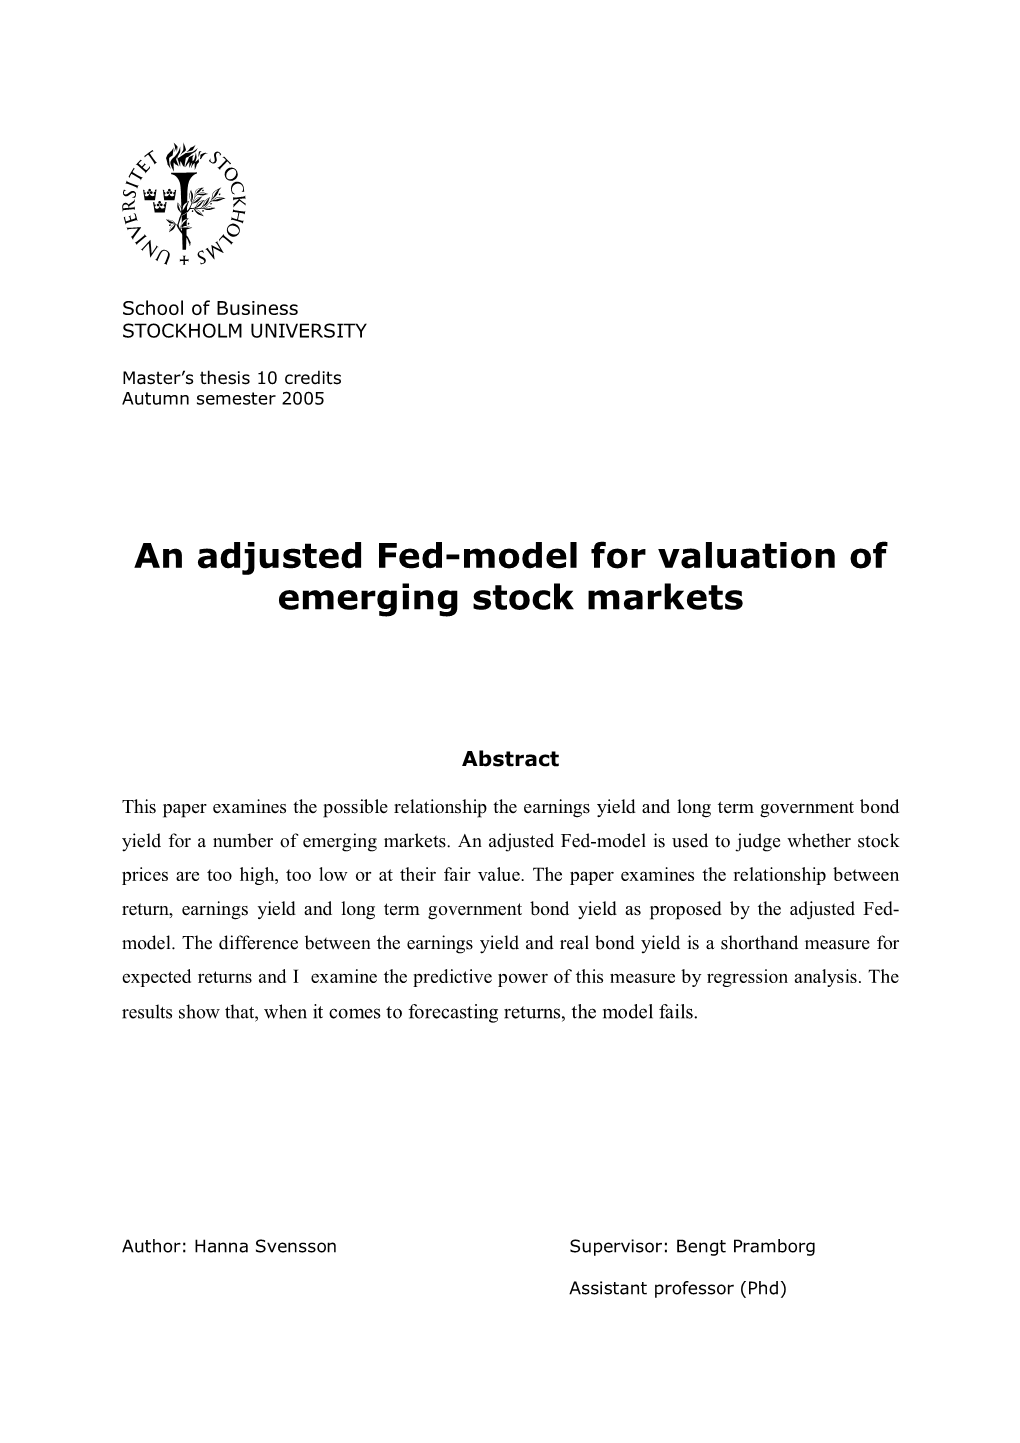 An Adjusted Fed-Model for Valuation of Emerging Stock Markets